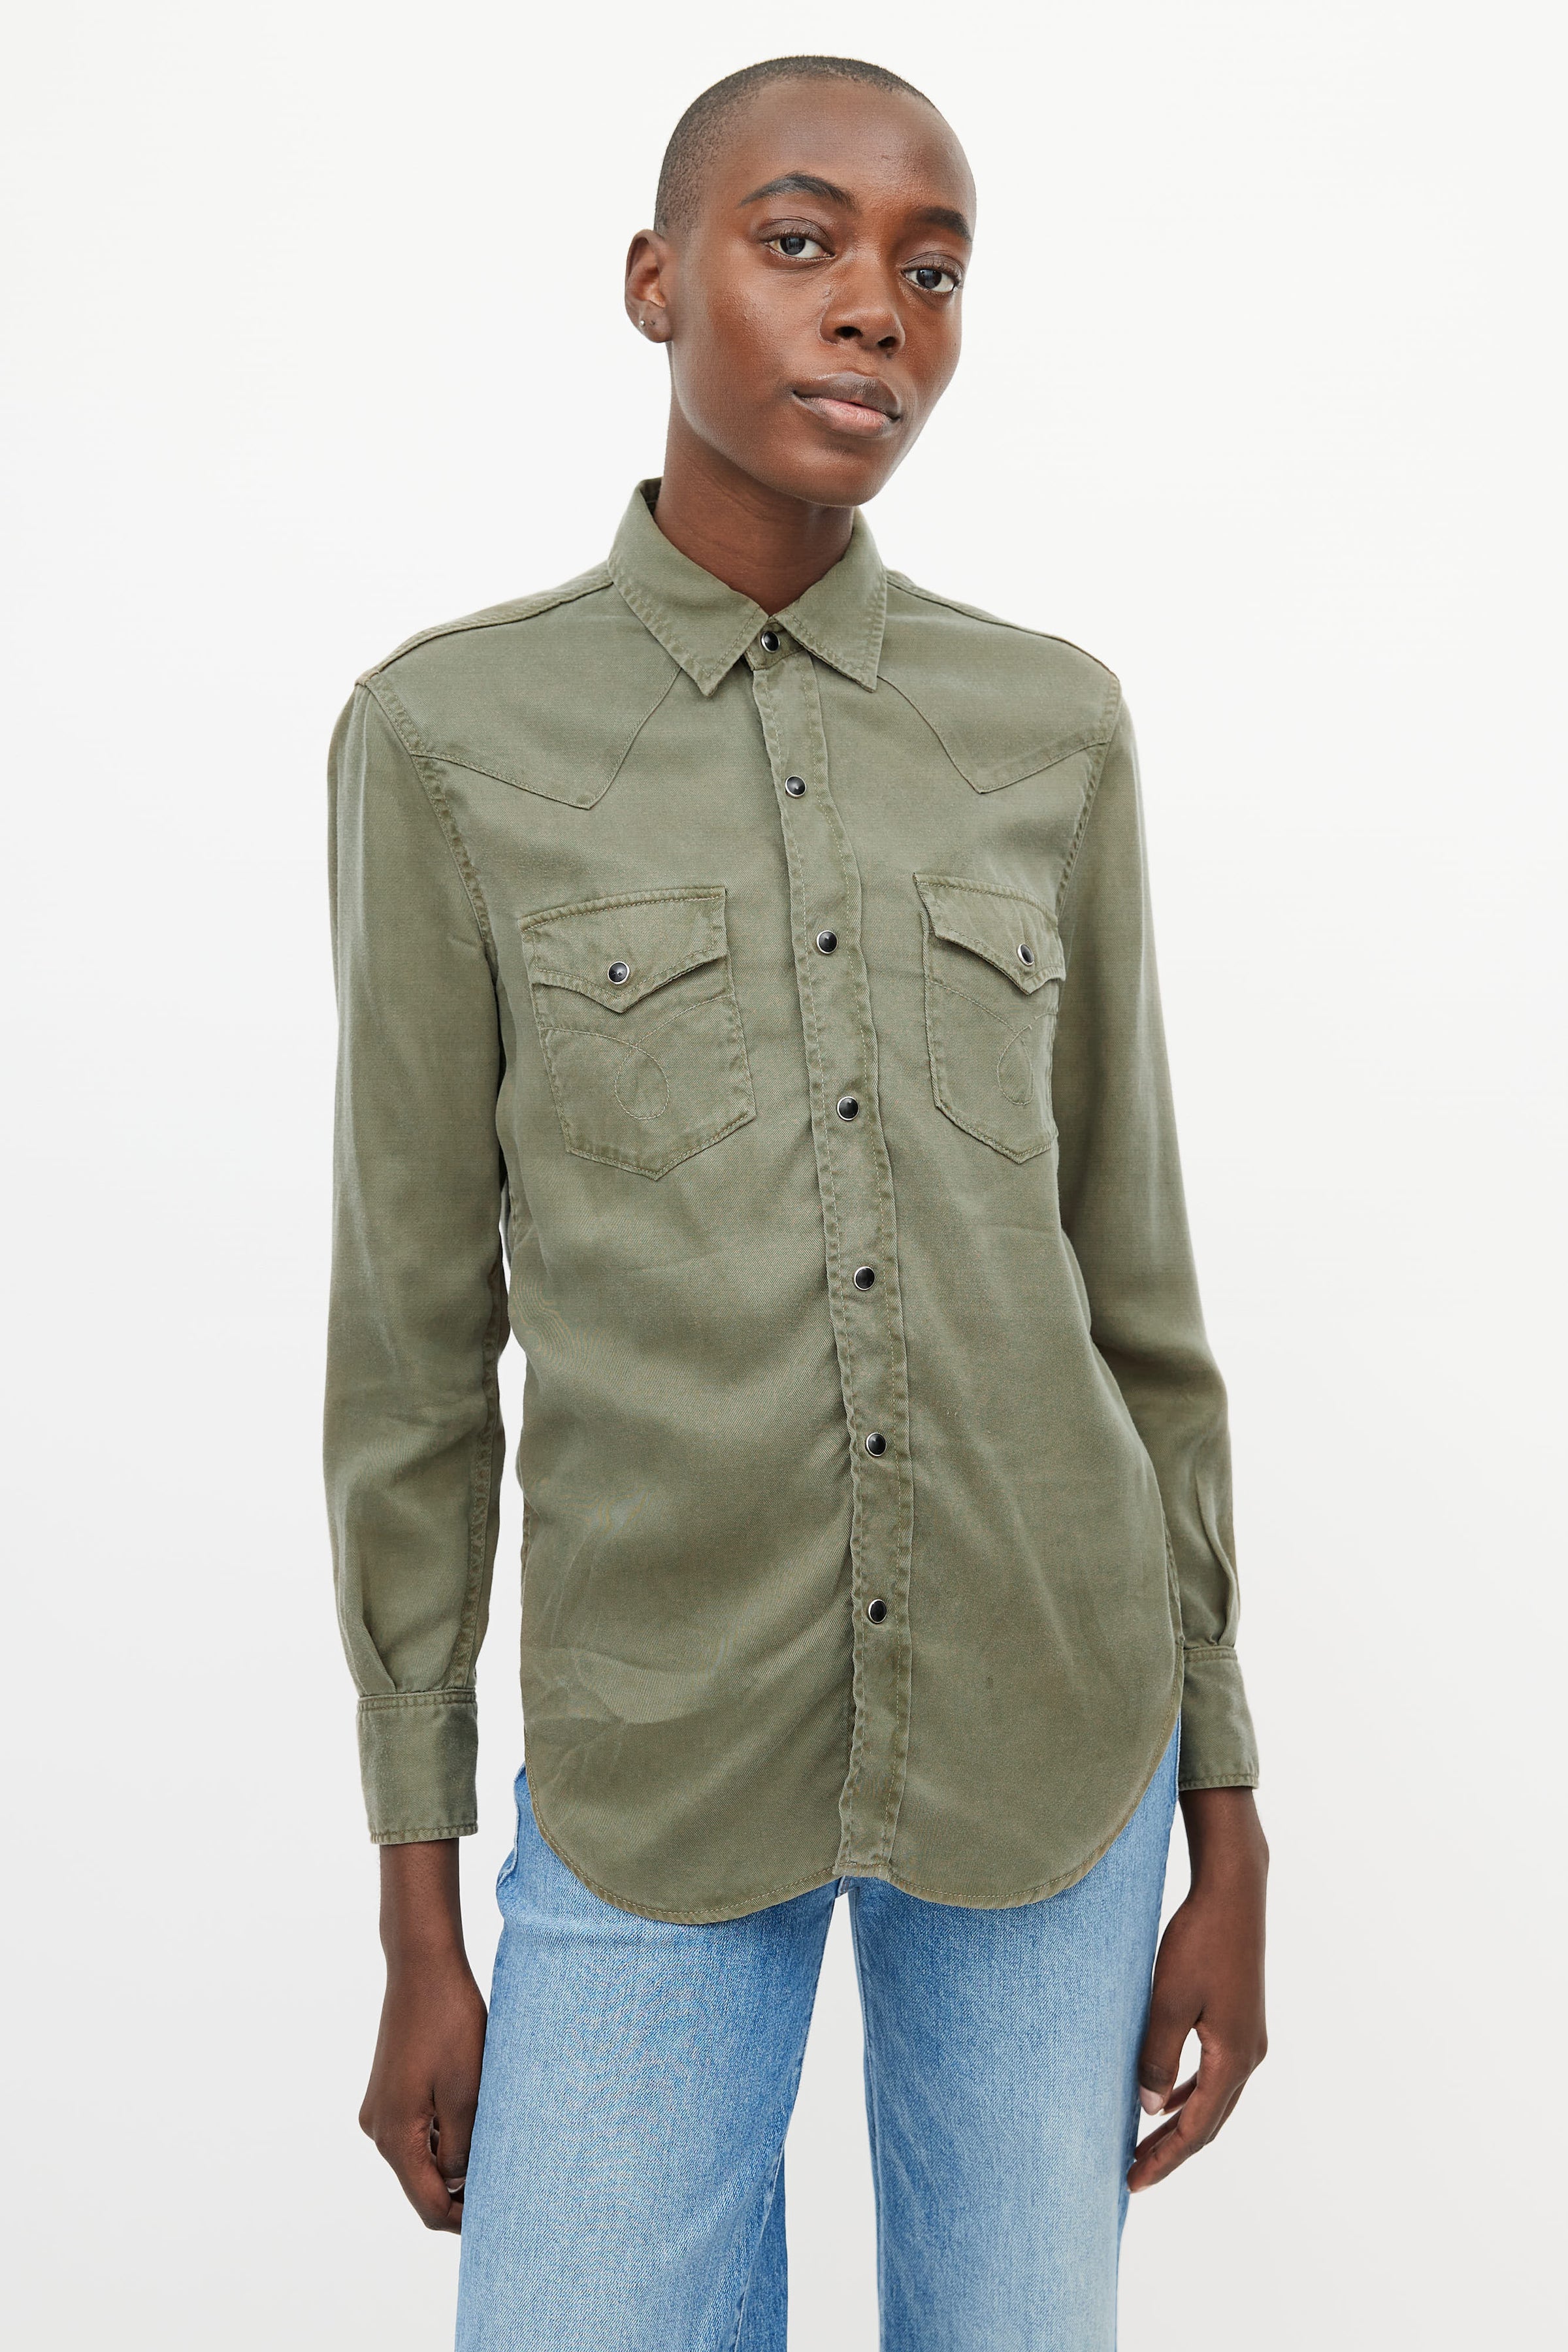 What colour jeans would look good with an army green button up shirt? -  Quora